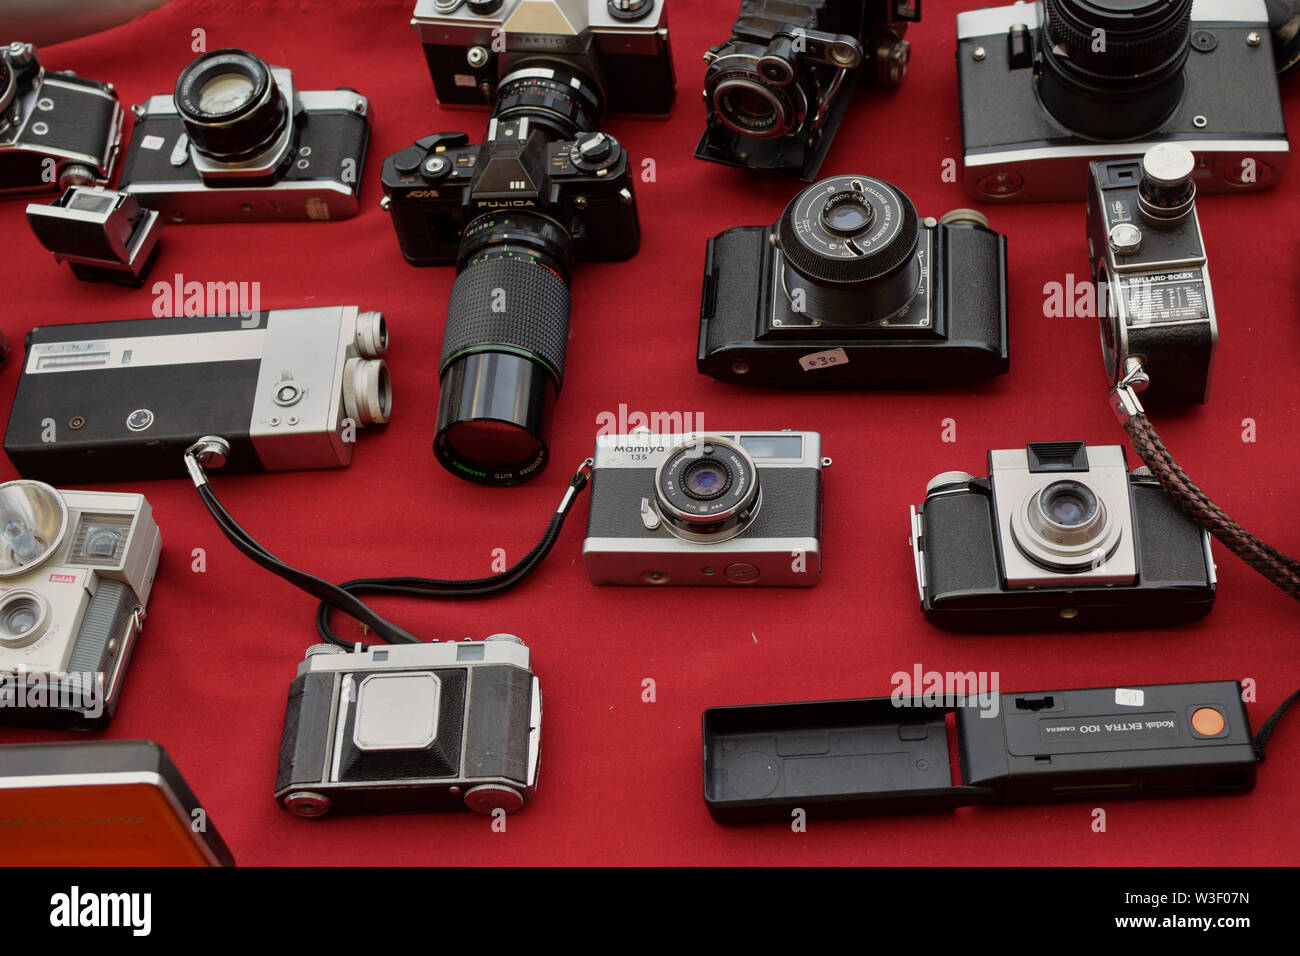 ATHENS, GREECE - APRIL 1, 2018: Vintage photo and video cameras for sale at street market. Antique photography equipment. Stock Photo